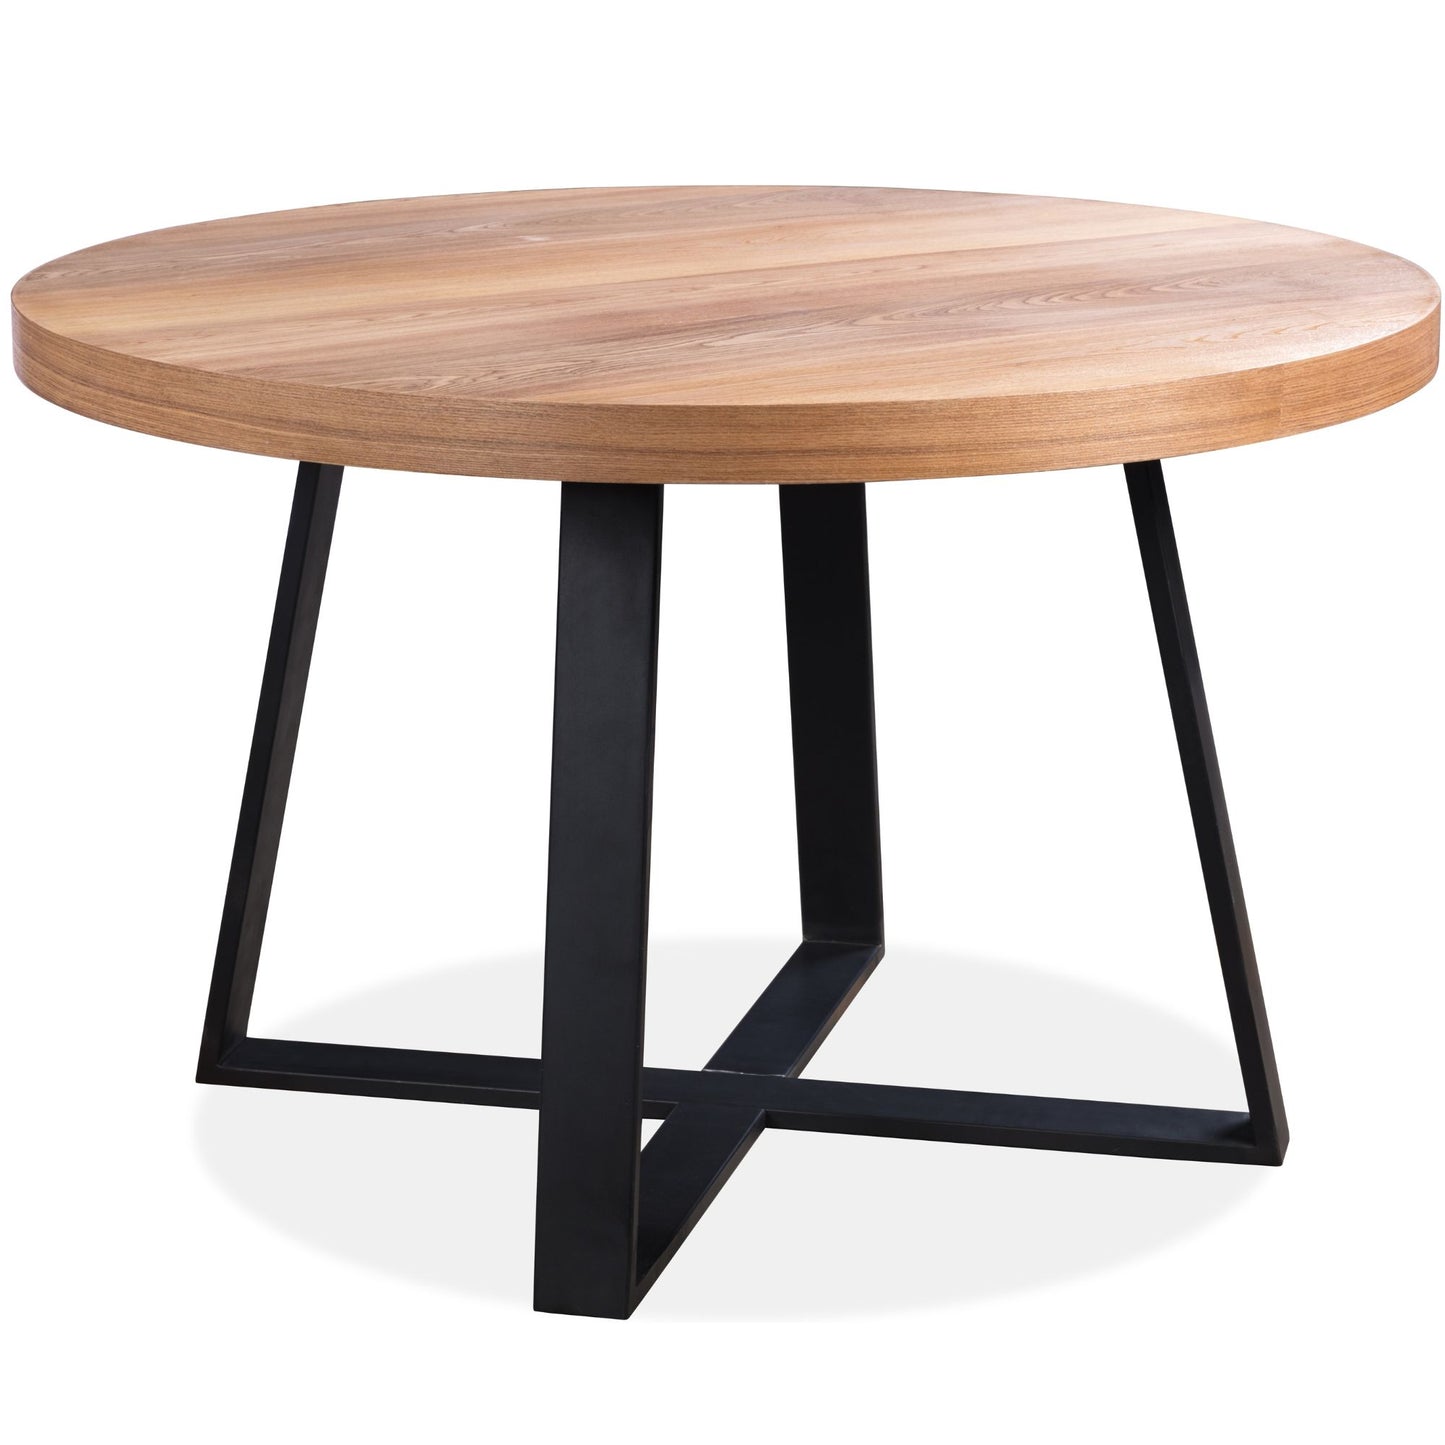 Elm Timber Wood Round Dining Table with Black Metal Leg 120cm - Natural